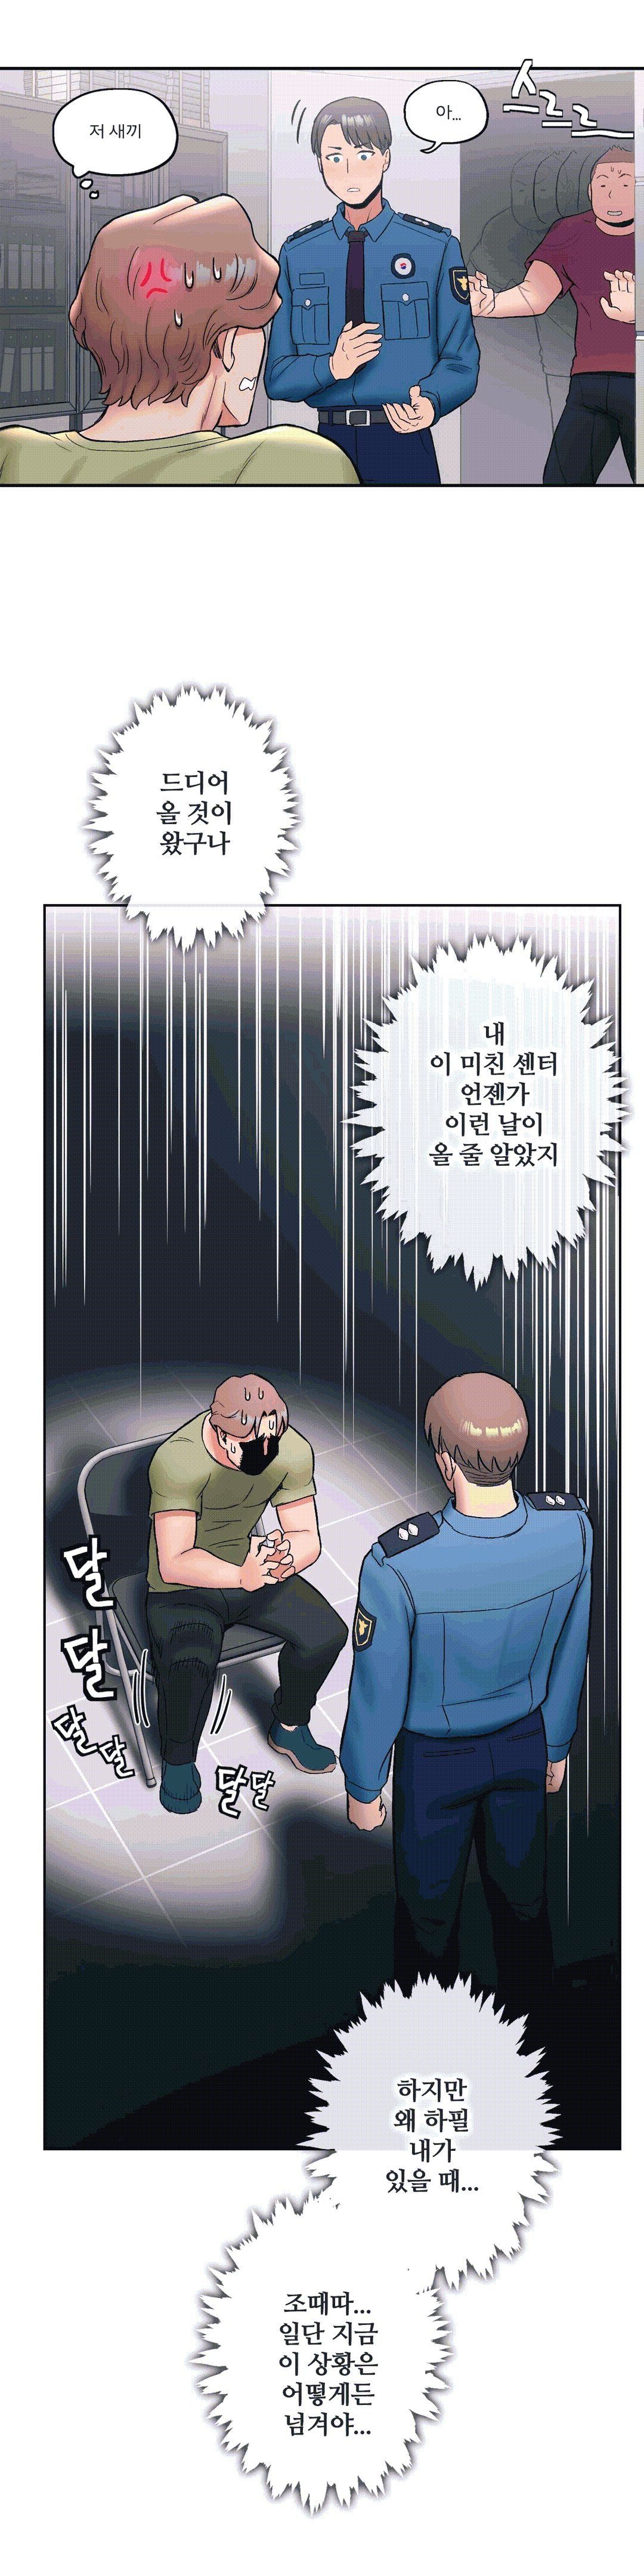 Sexercise Raw - Chapter 16 Page 23